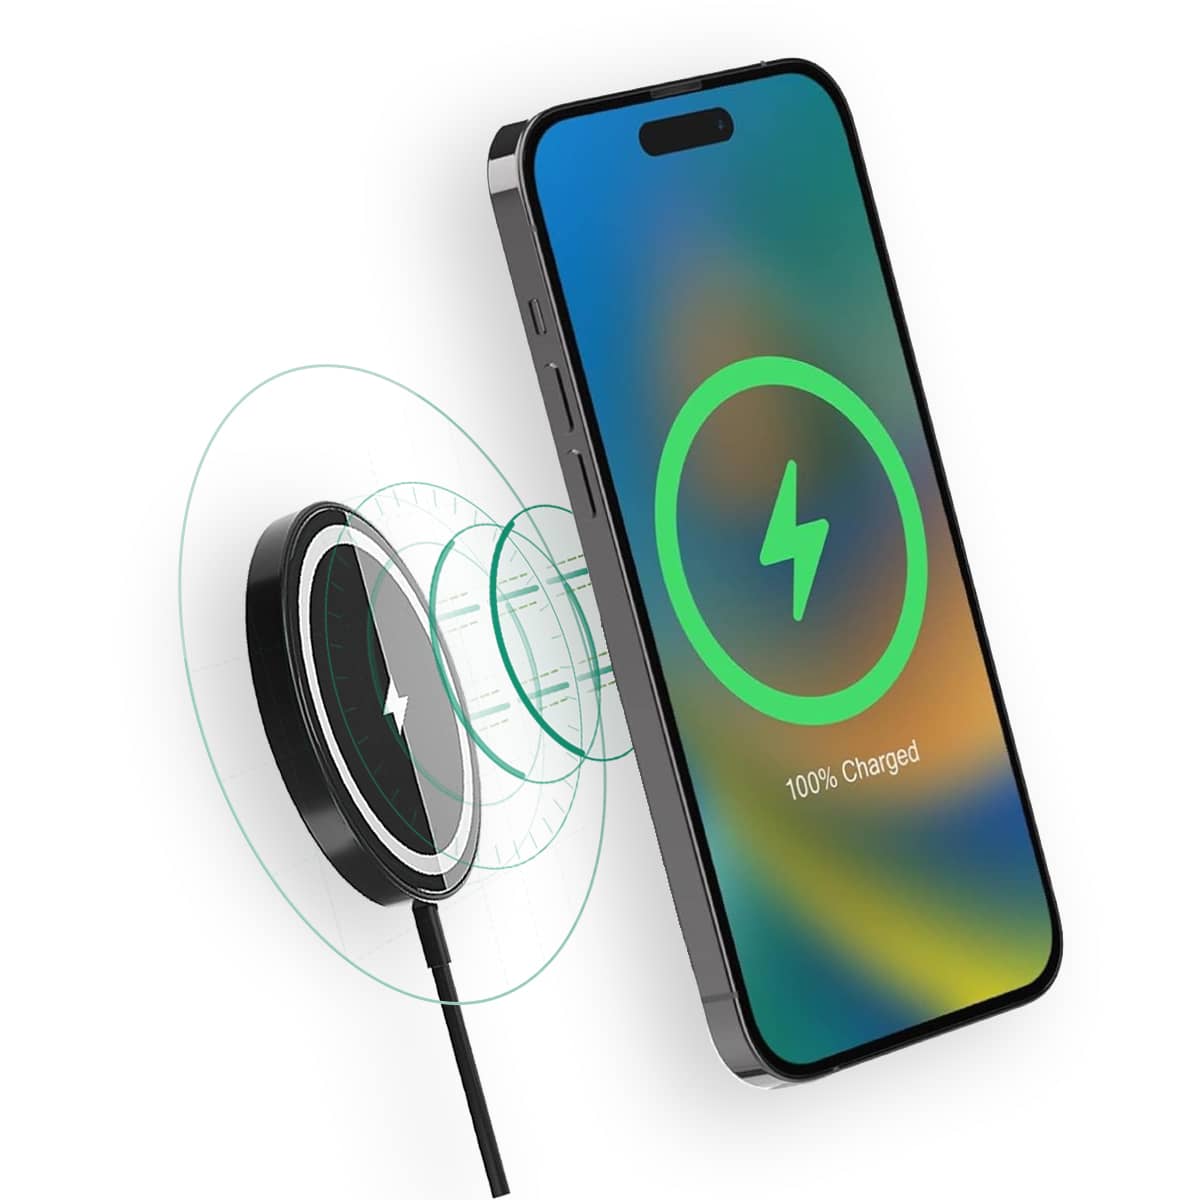 Seinxon-wireless-charger-is-charging-iPhone15